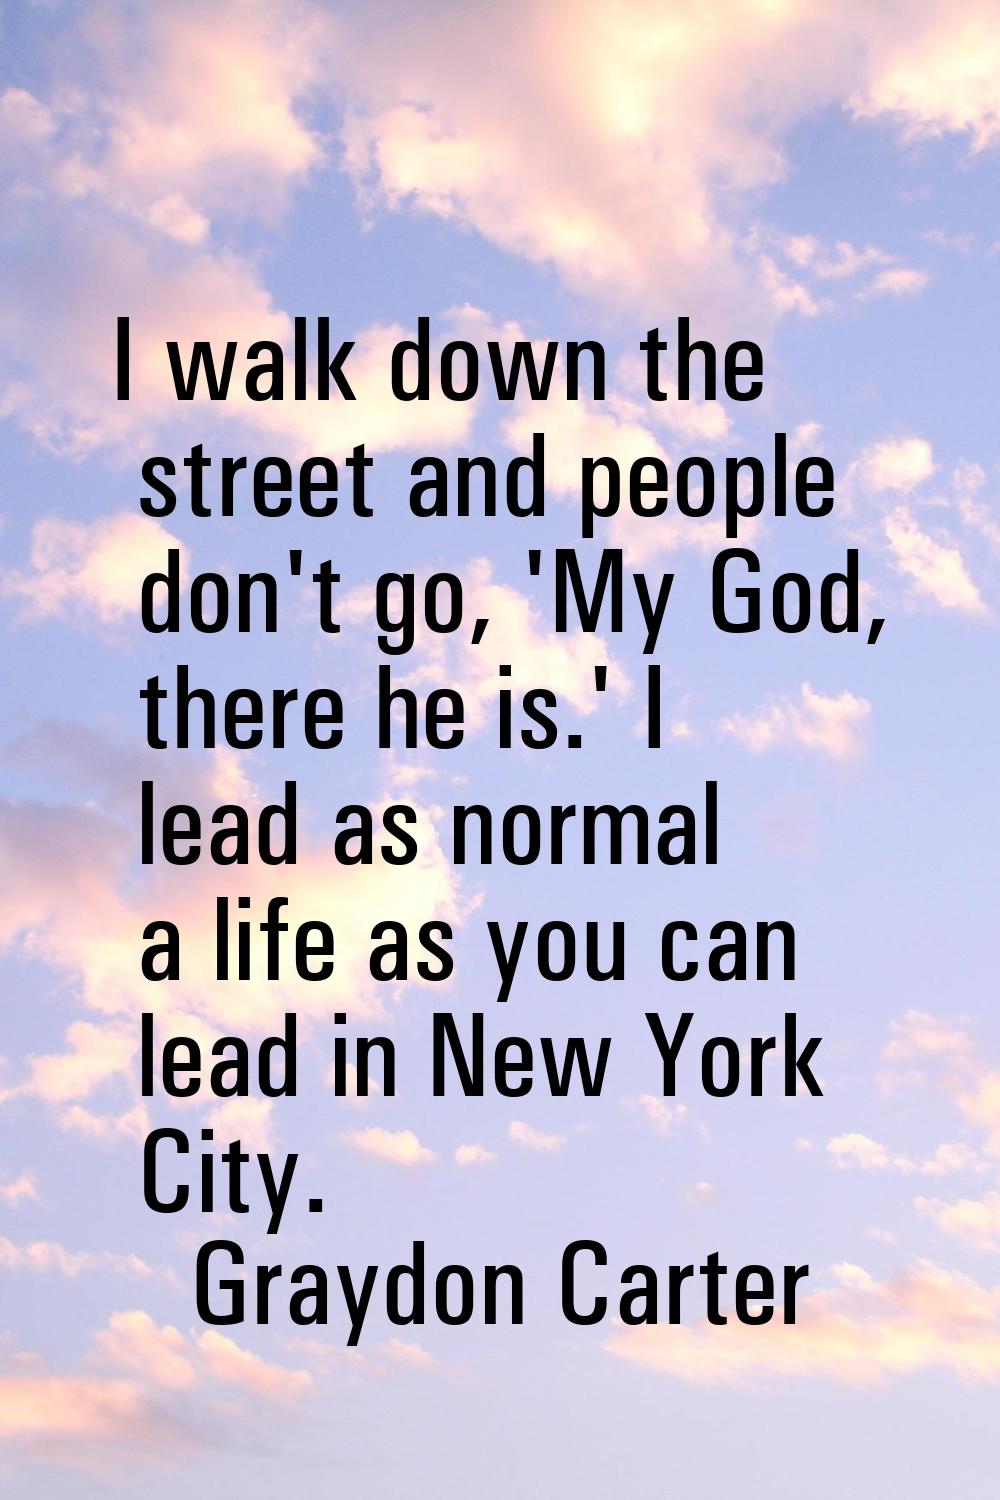 I walk down the street and people don't go, 'My God, there he is.' I lead as normal a life as you c